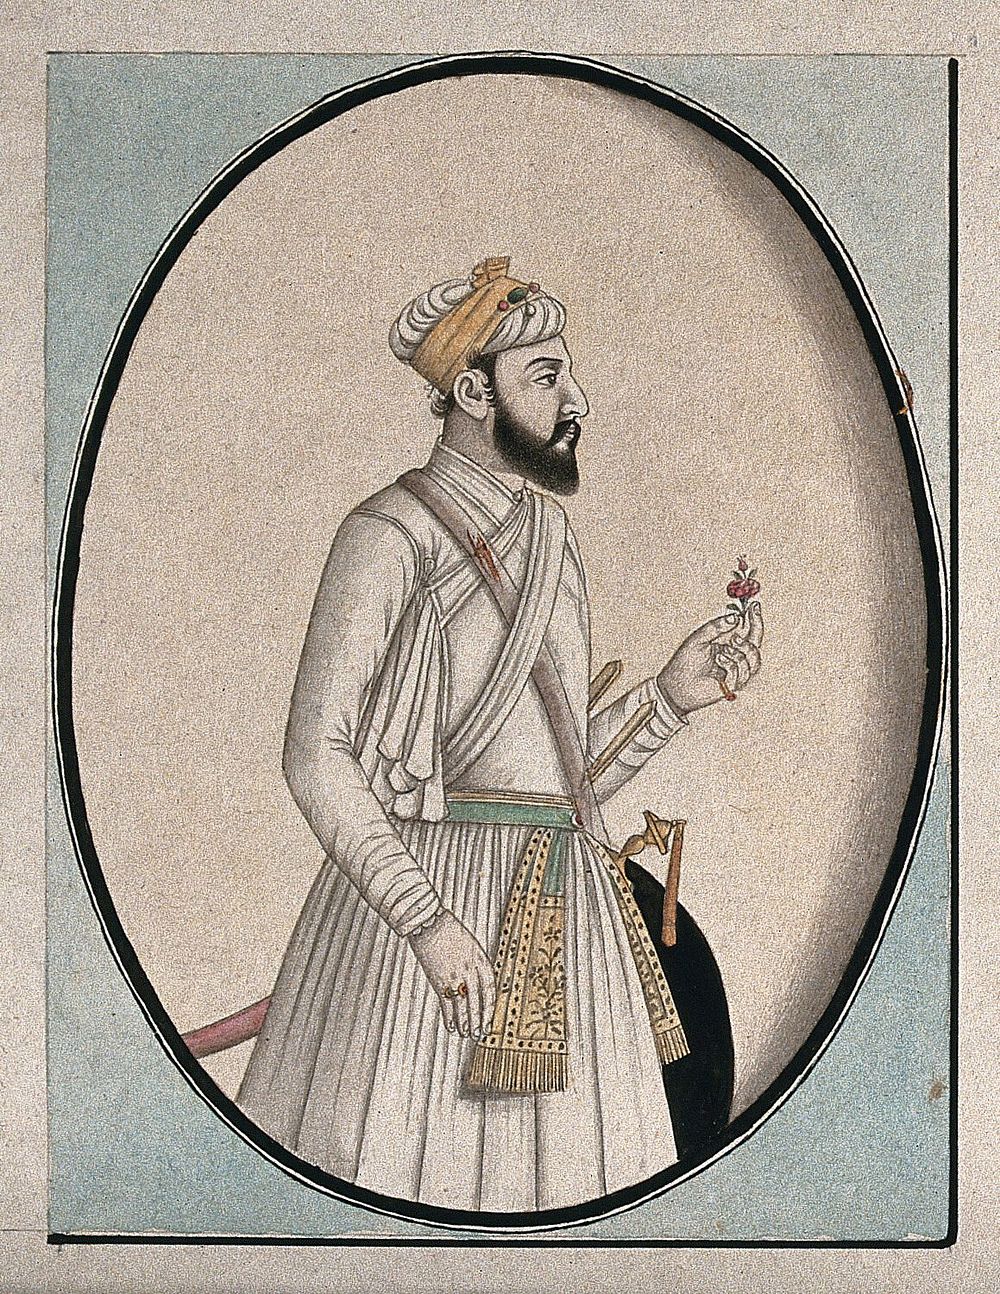 A Mughal courtier holding a flower. Watercolour drawing by an Indian artist.